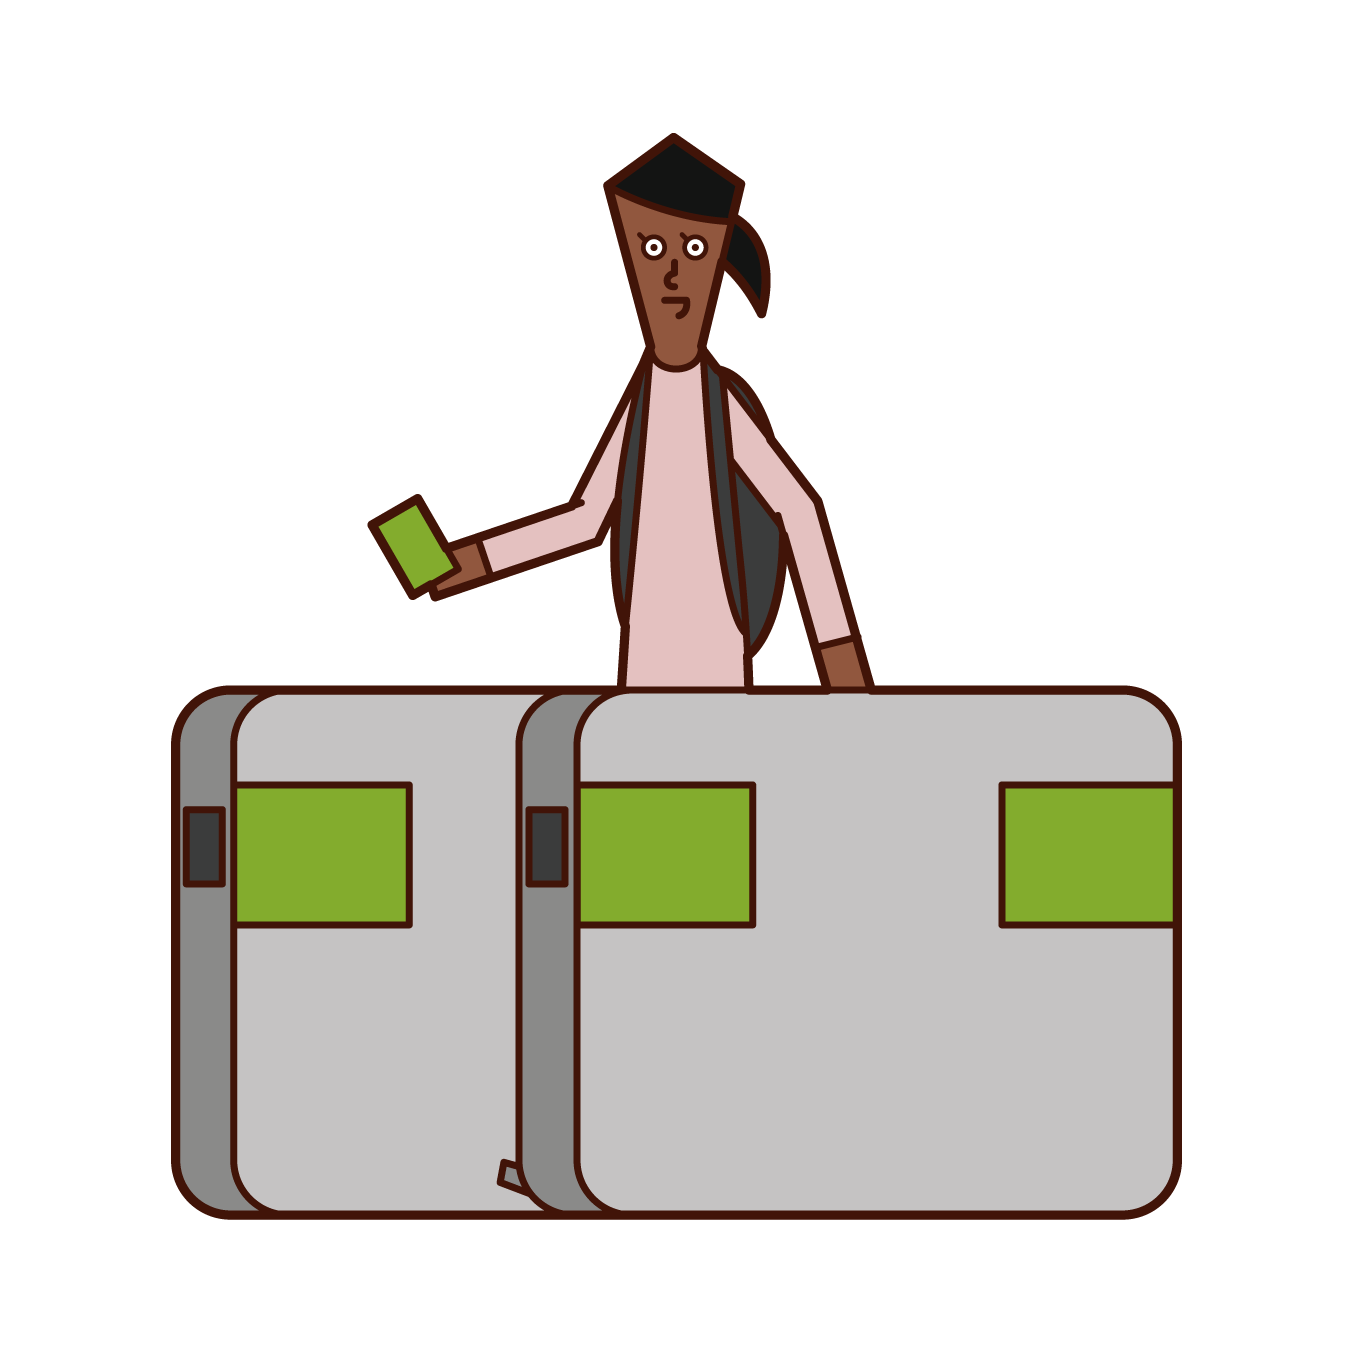 Illustration of a woman passing through the ticket gate of a station